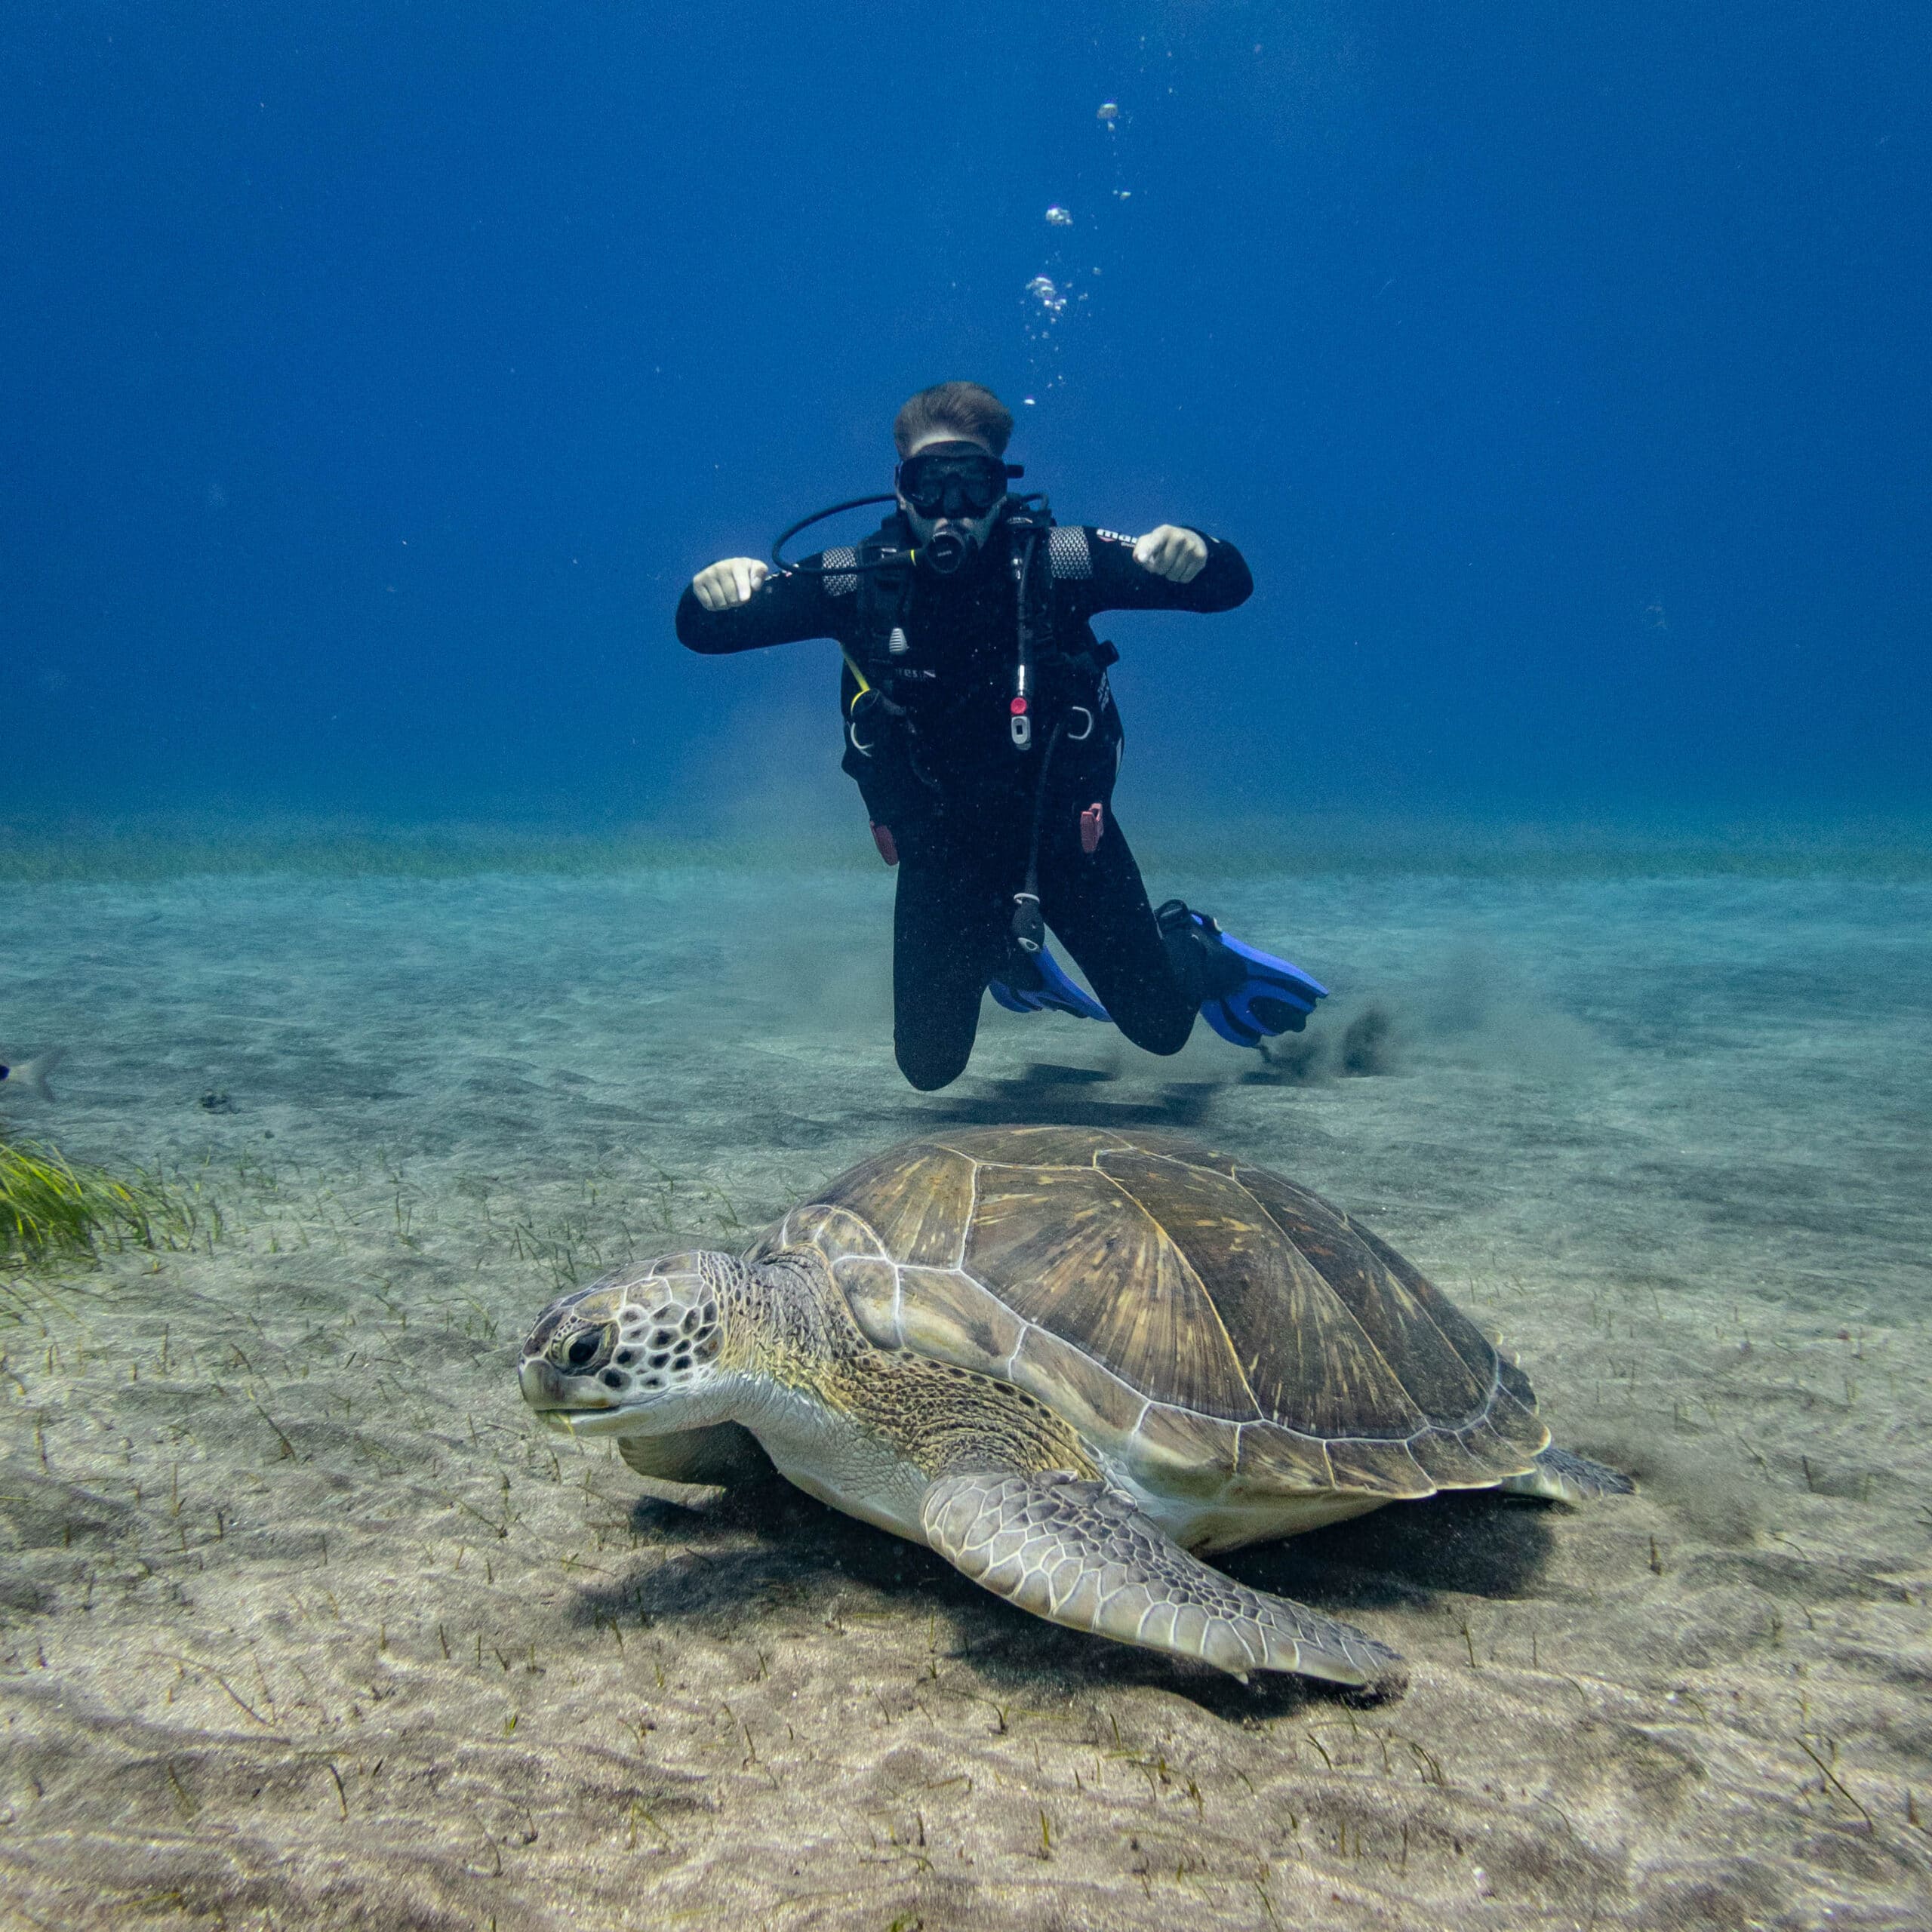 Basic Diver on his first dive at the dive spot of Abades with local green sea turtle Eva